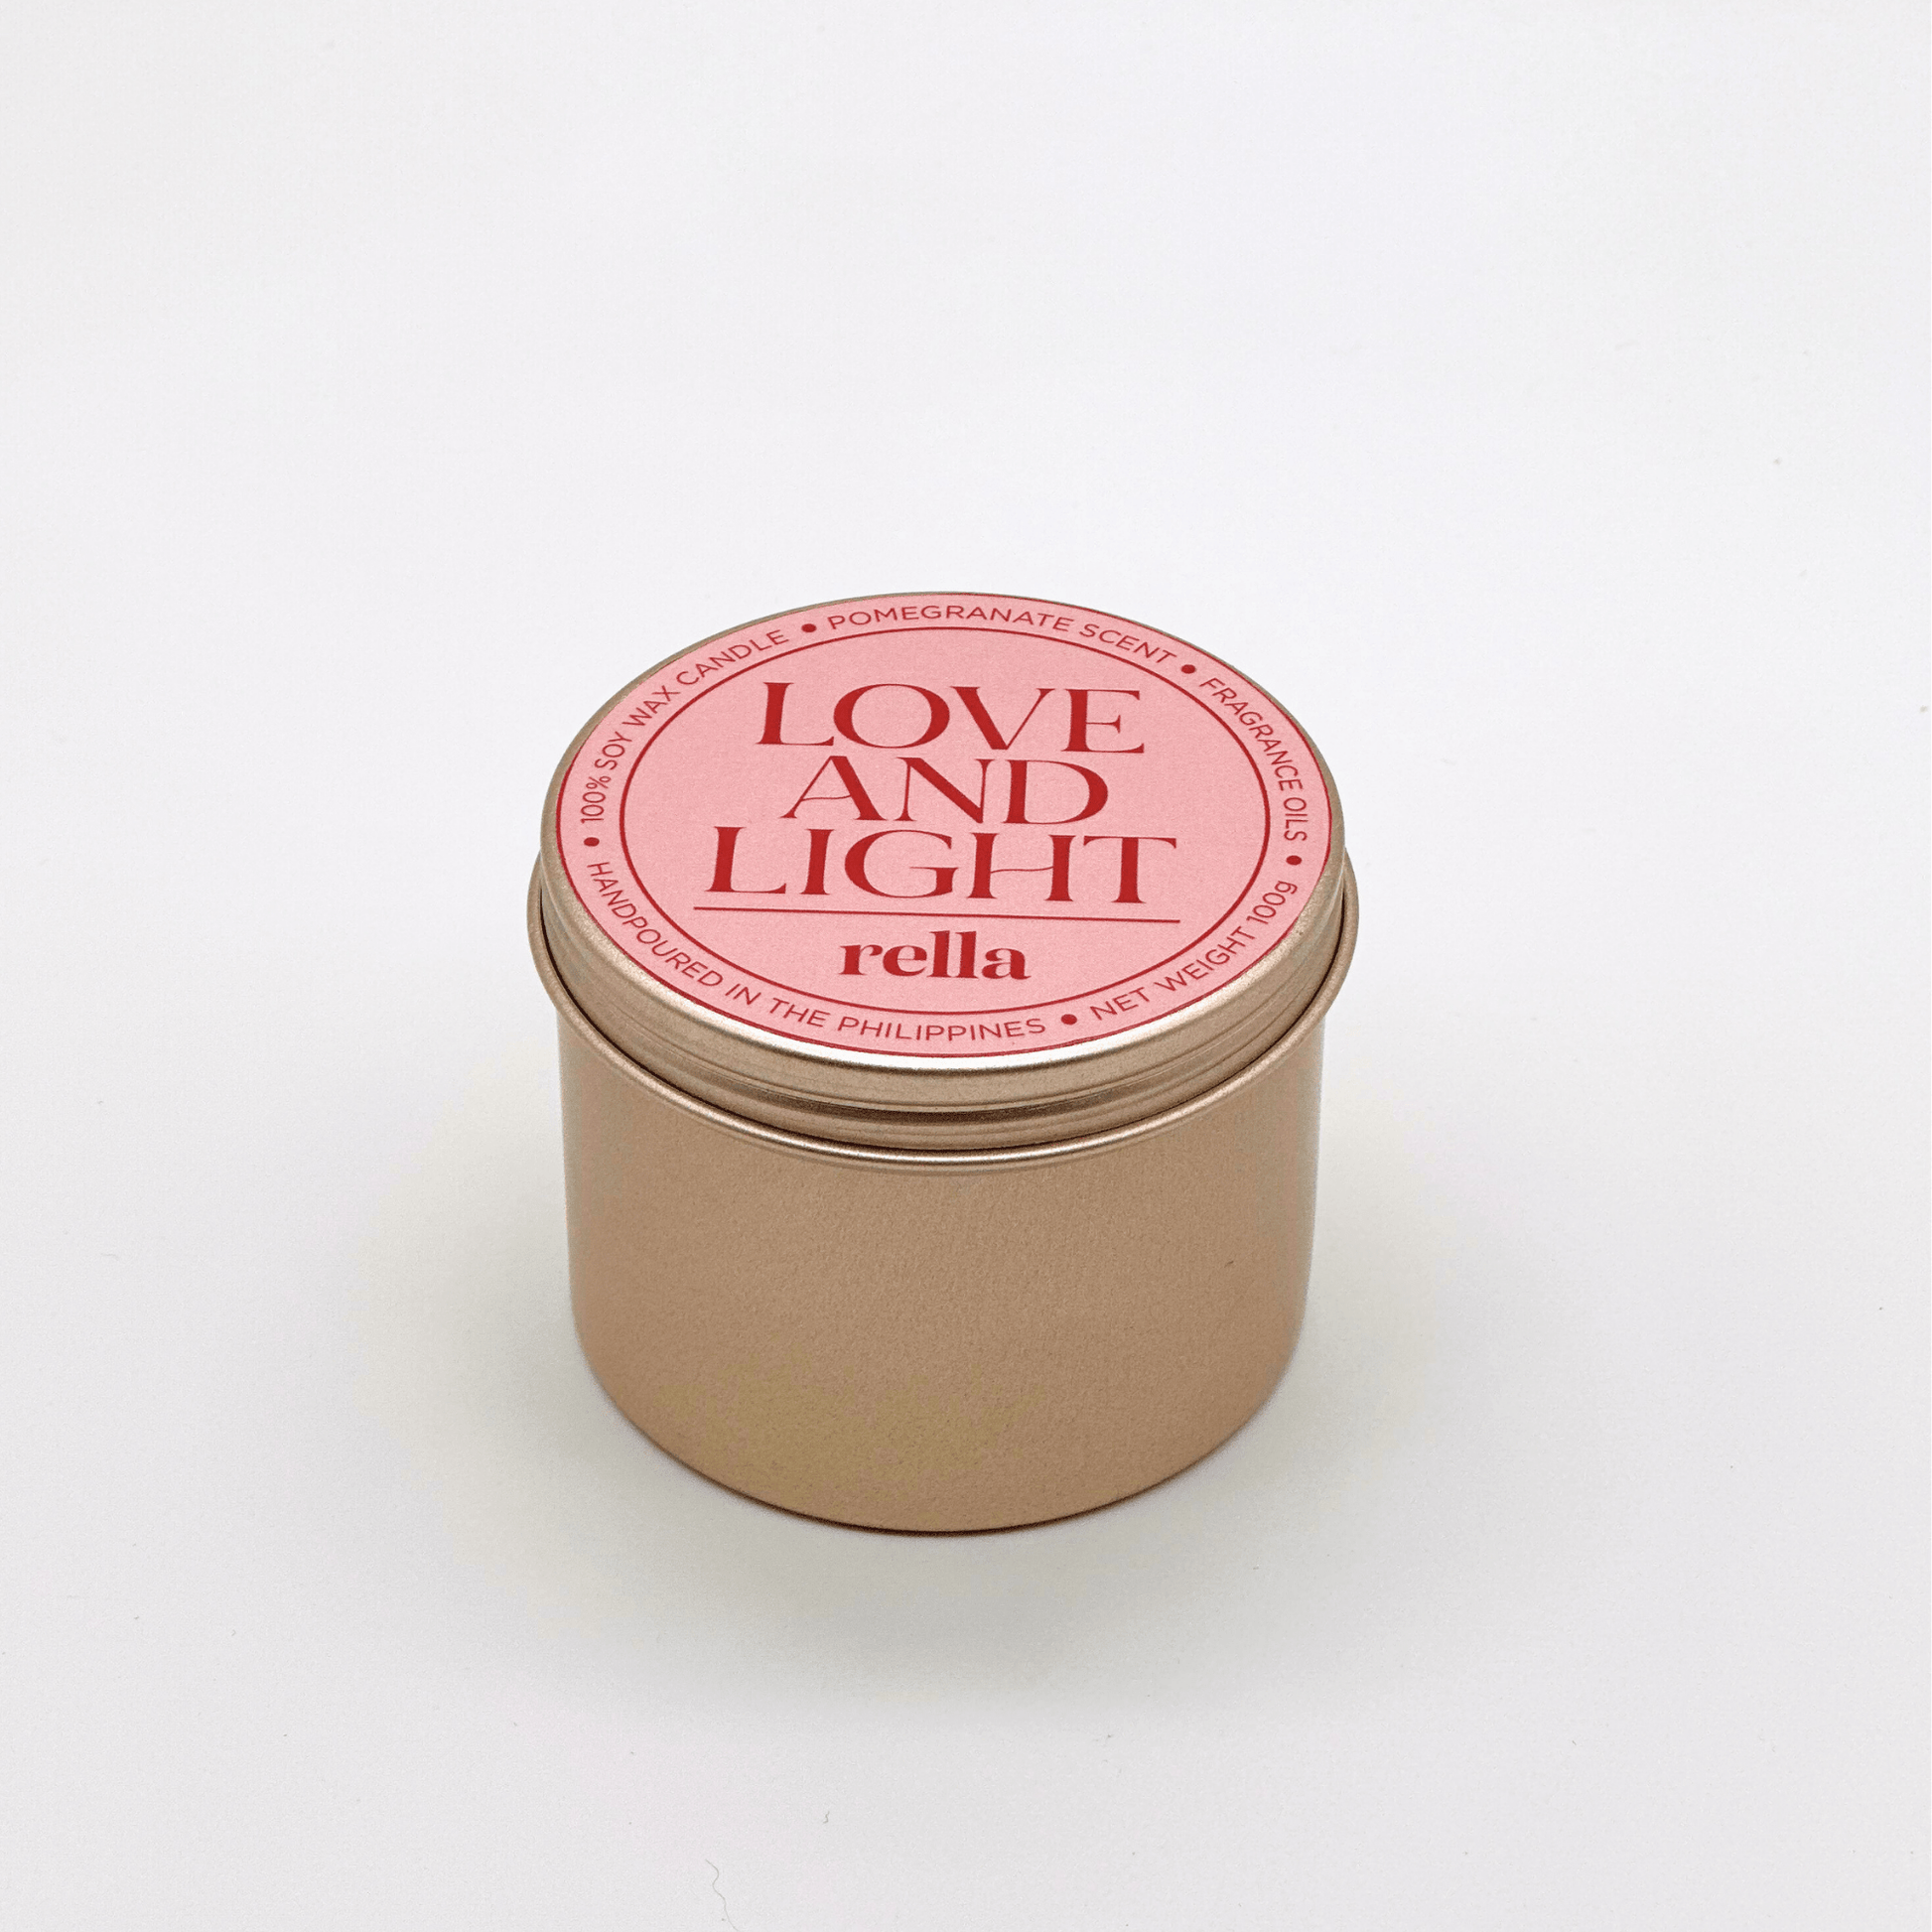 100g Love and Light: Pomegranate Scented Soy Wax Candle